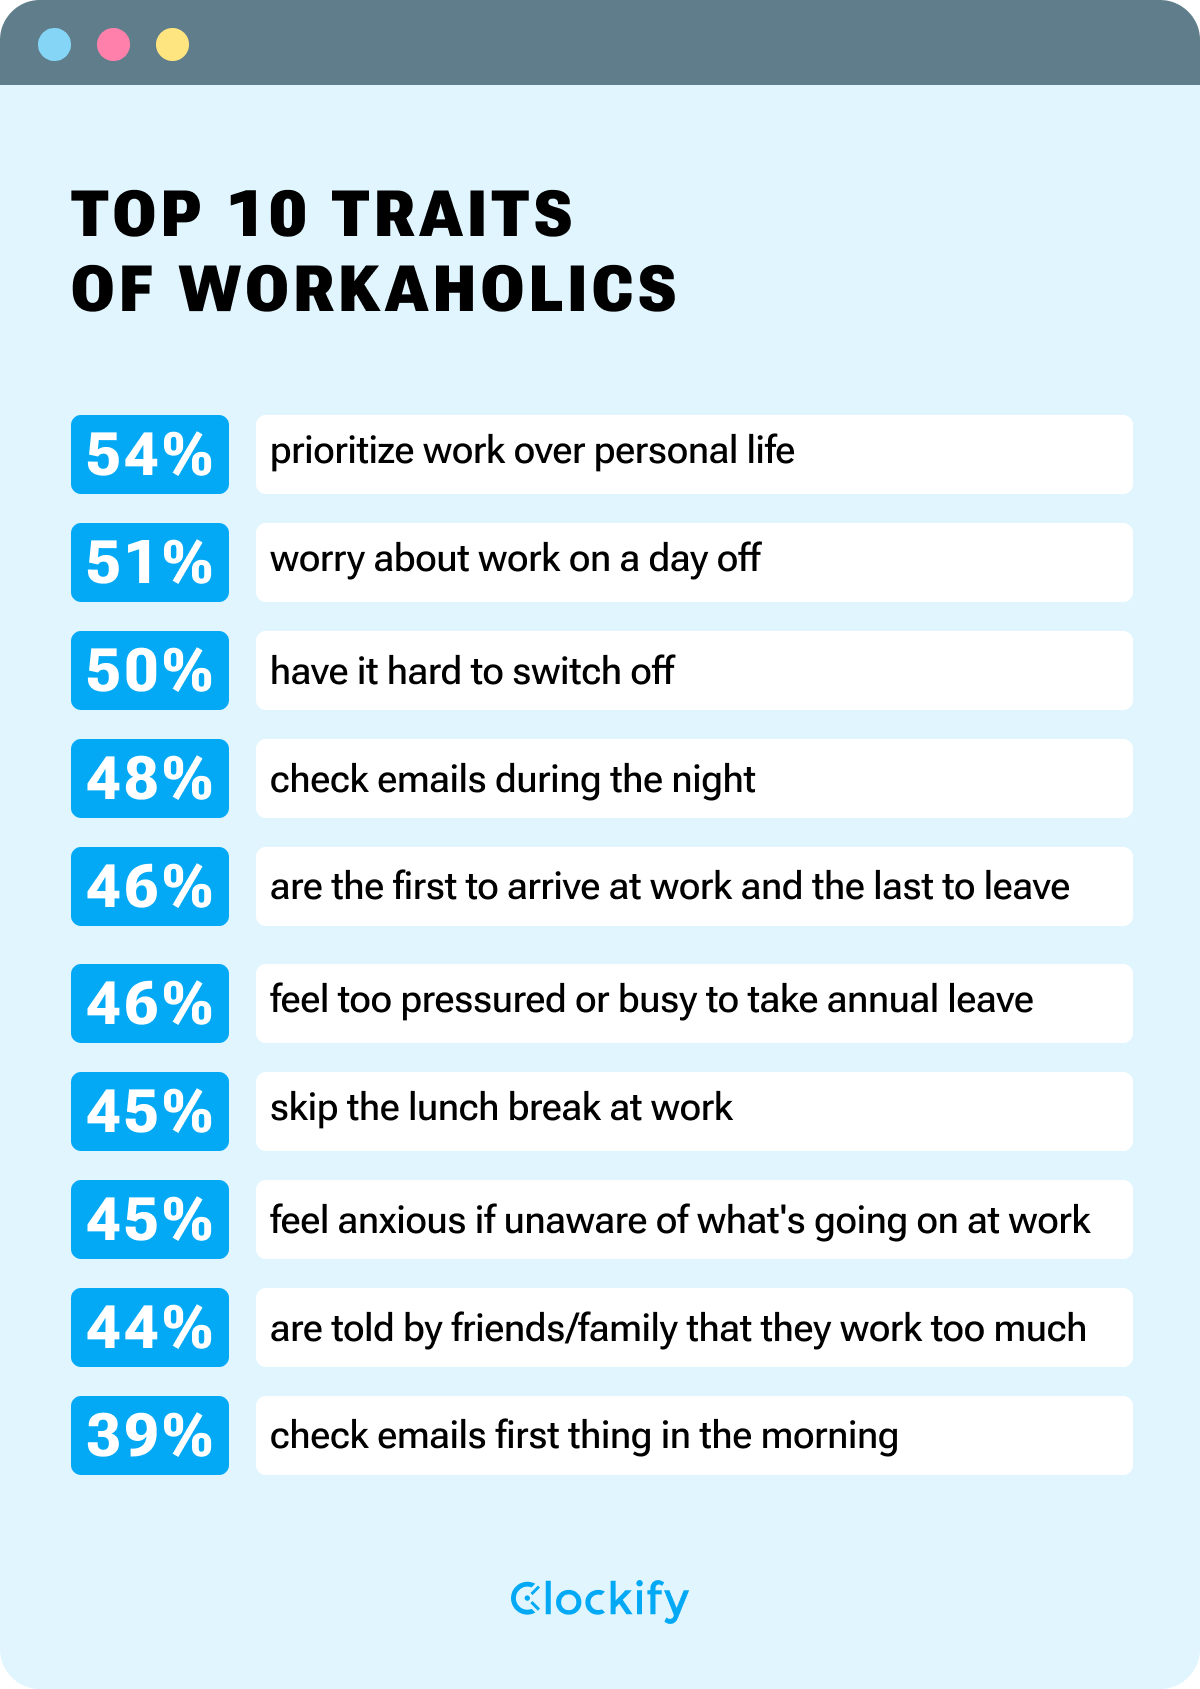 The top 10 traits of workaholics - infographic